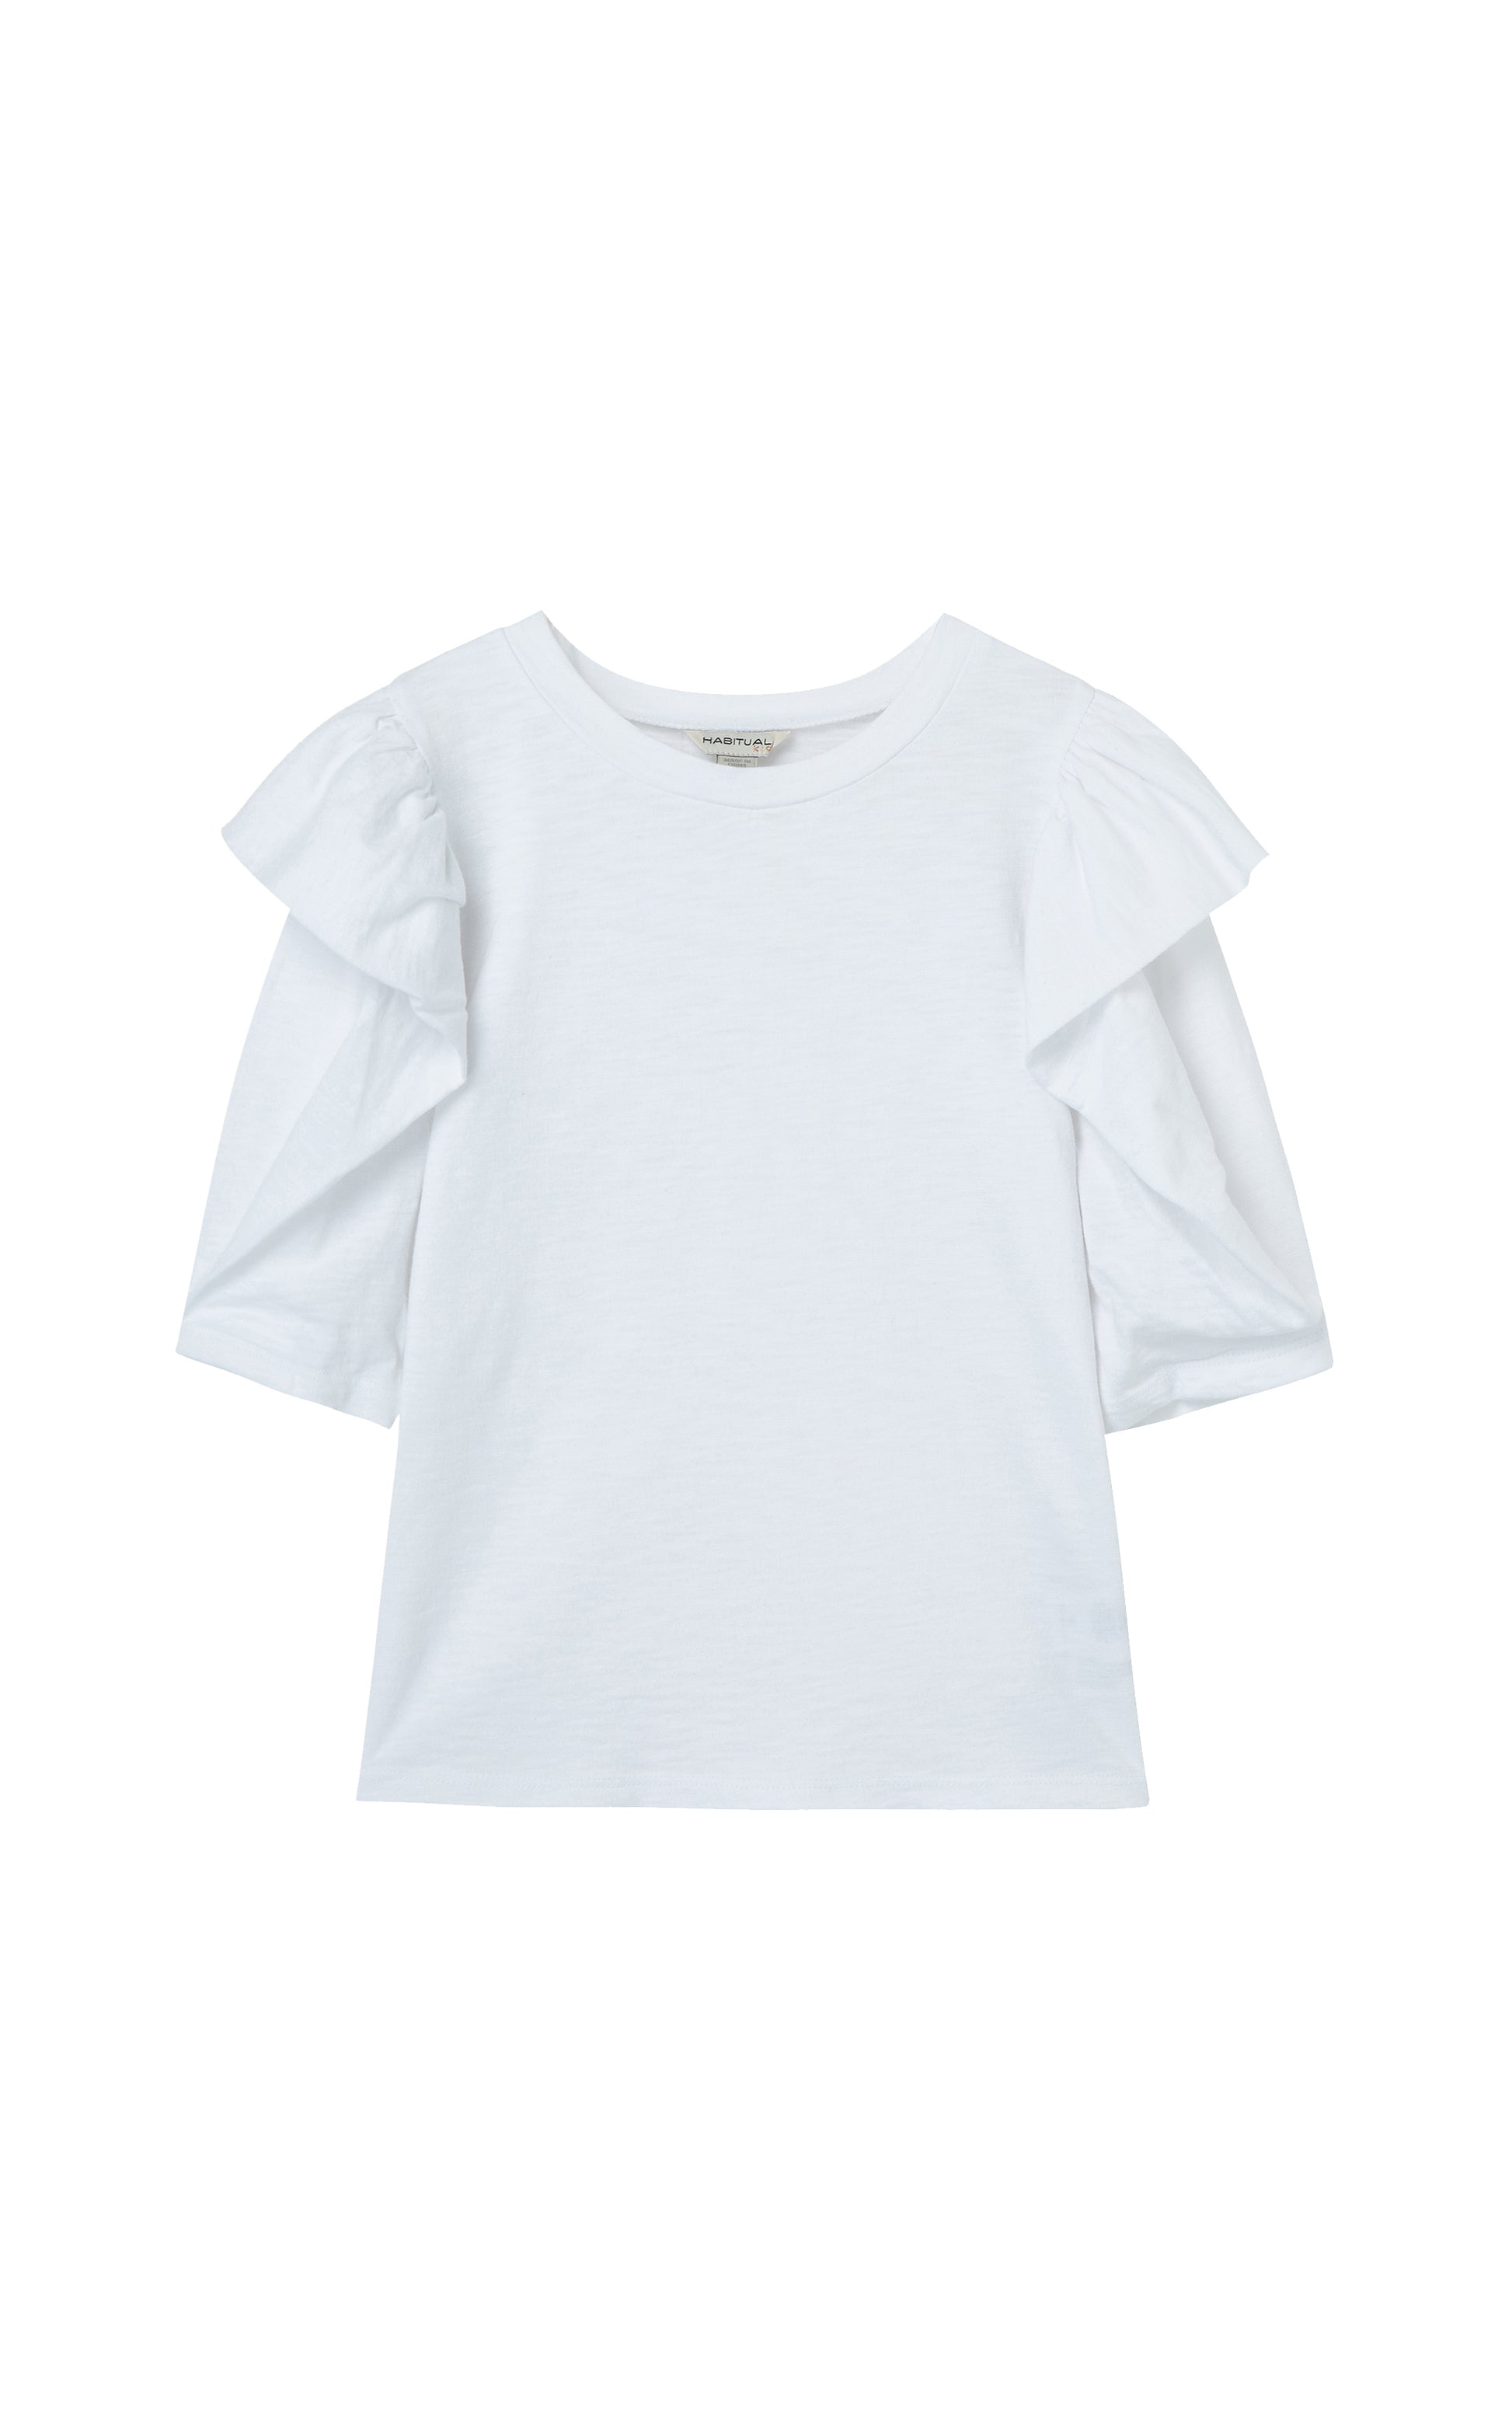 Front View White Top with Large sleeve ruffle 